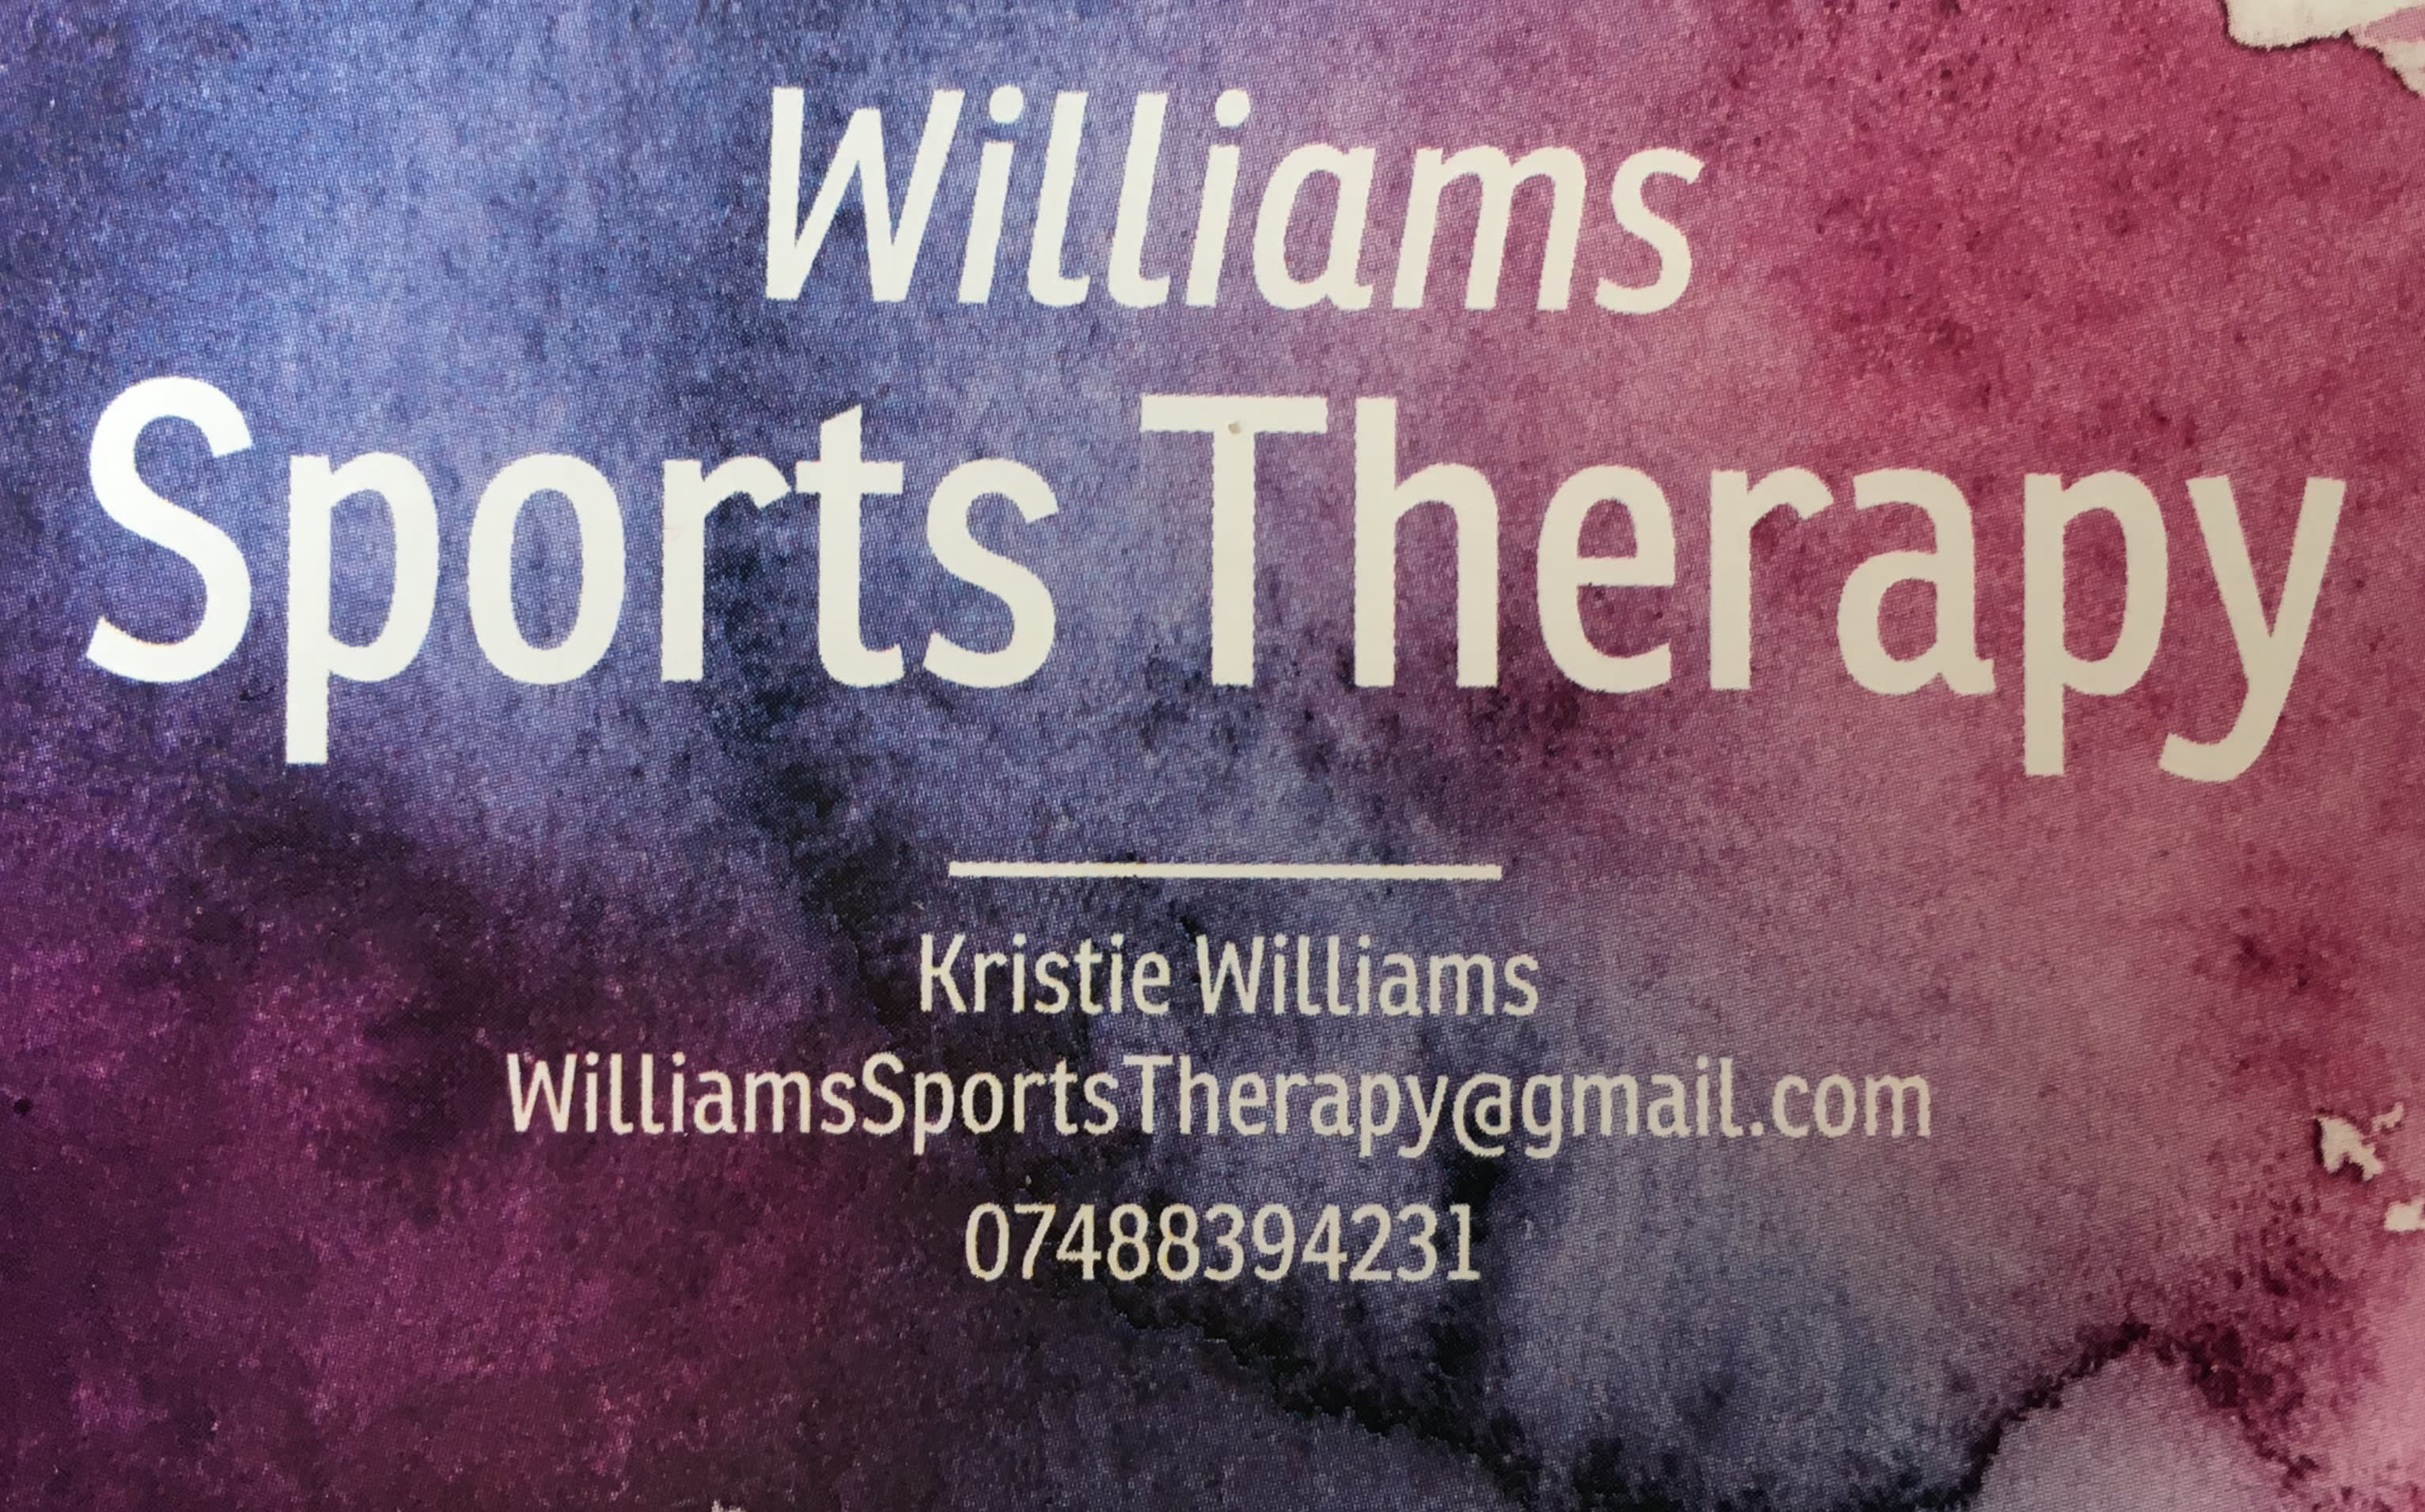 Williams Sports Therapy